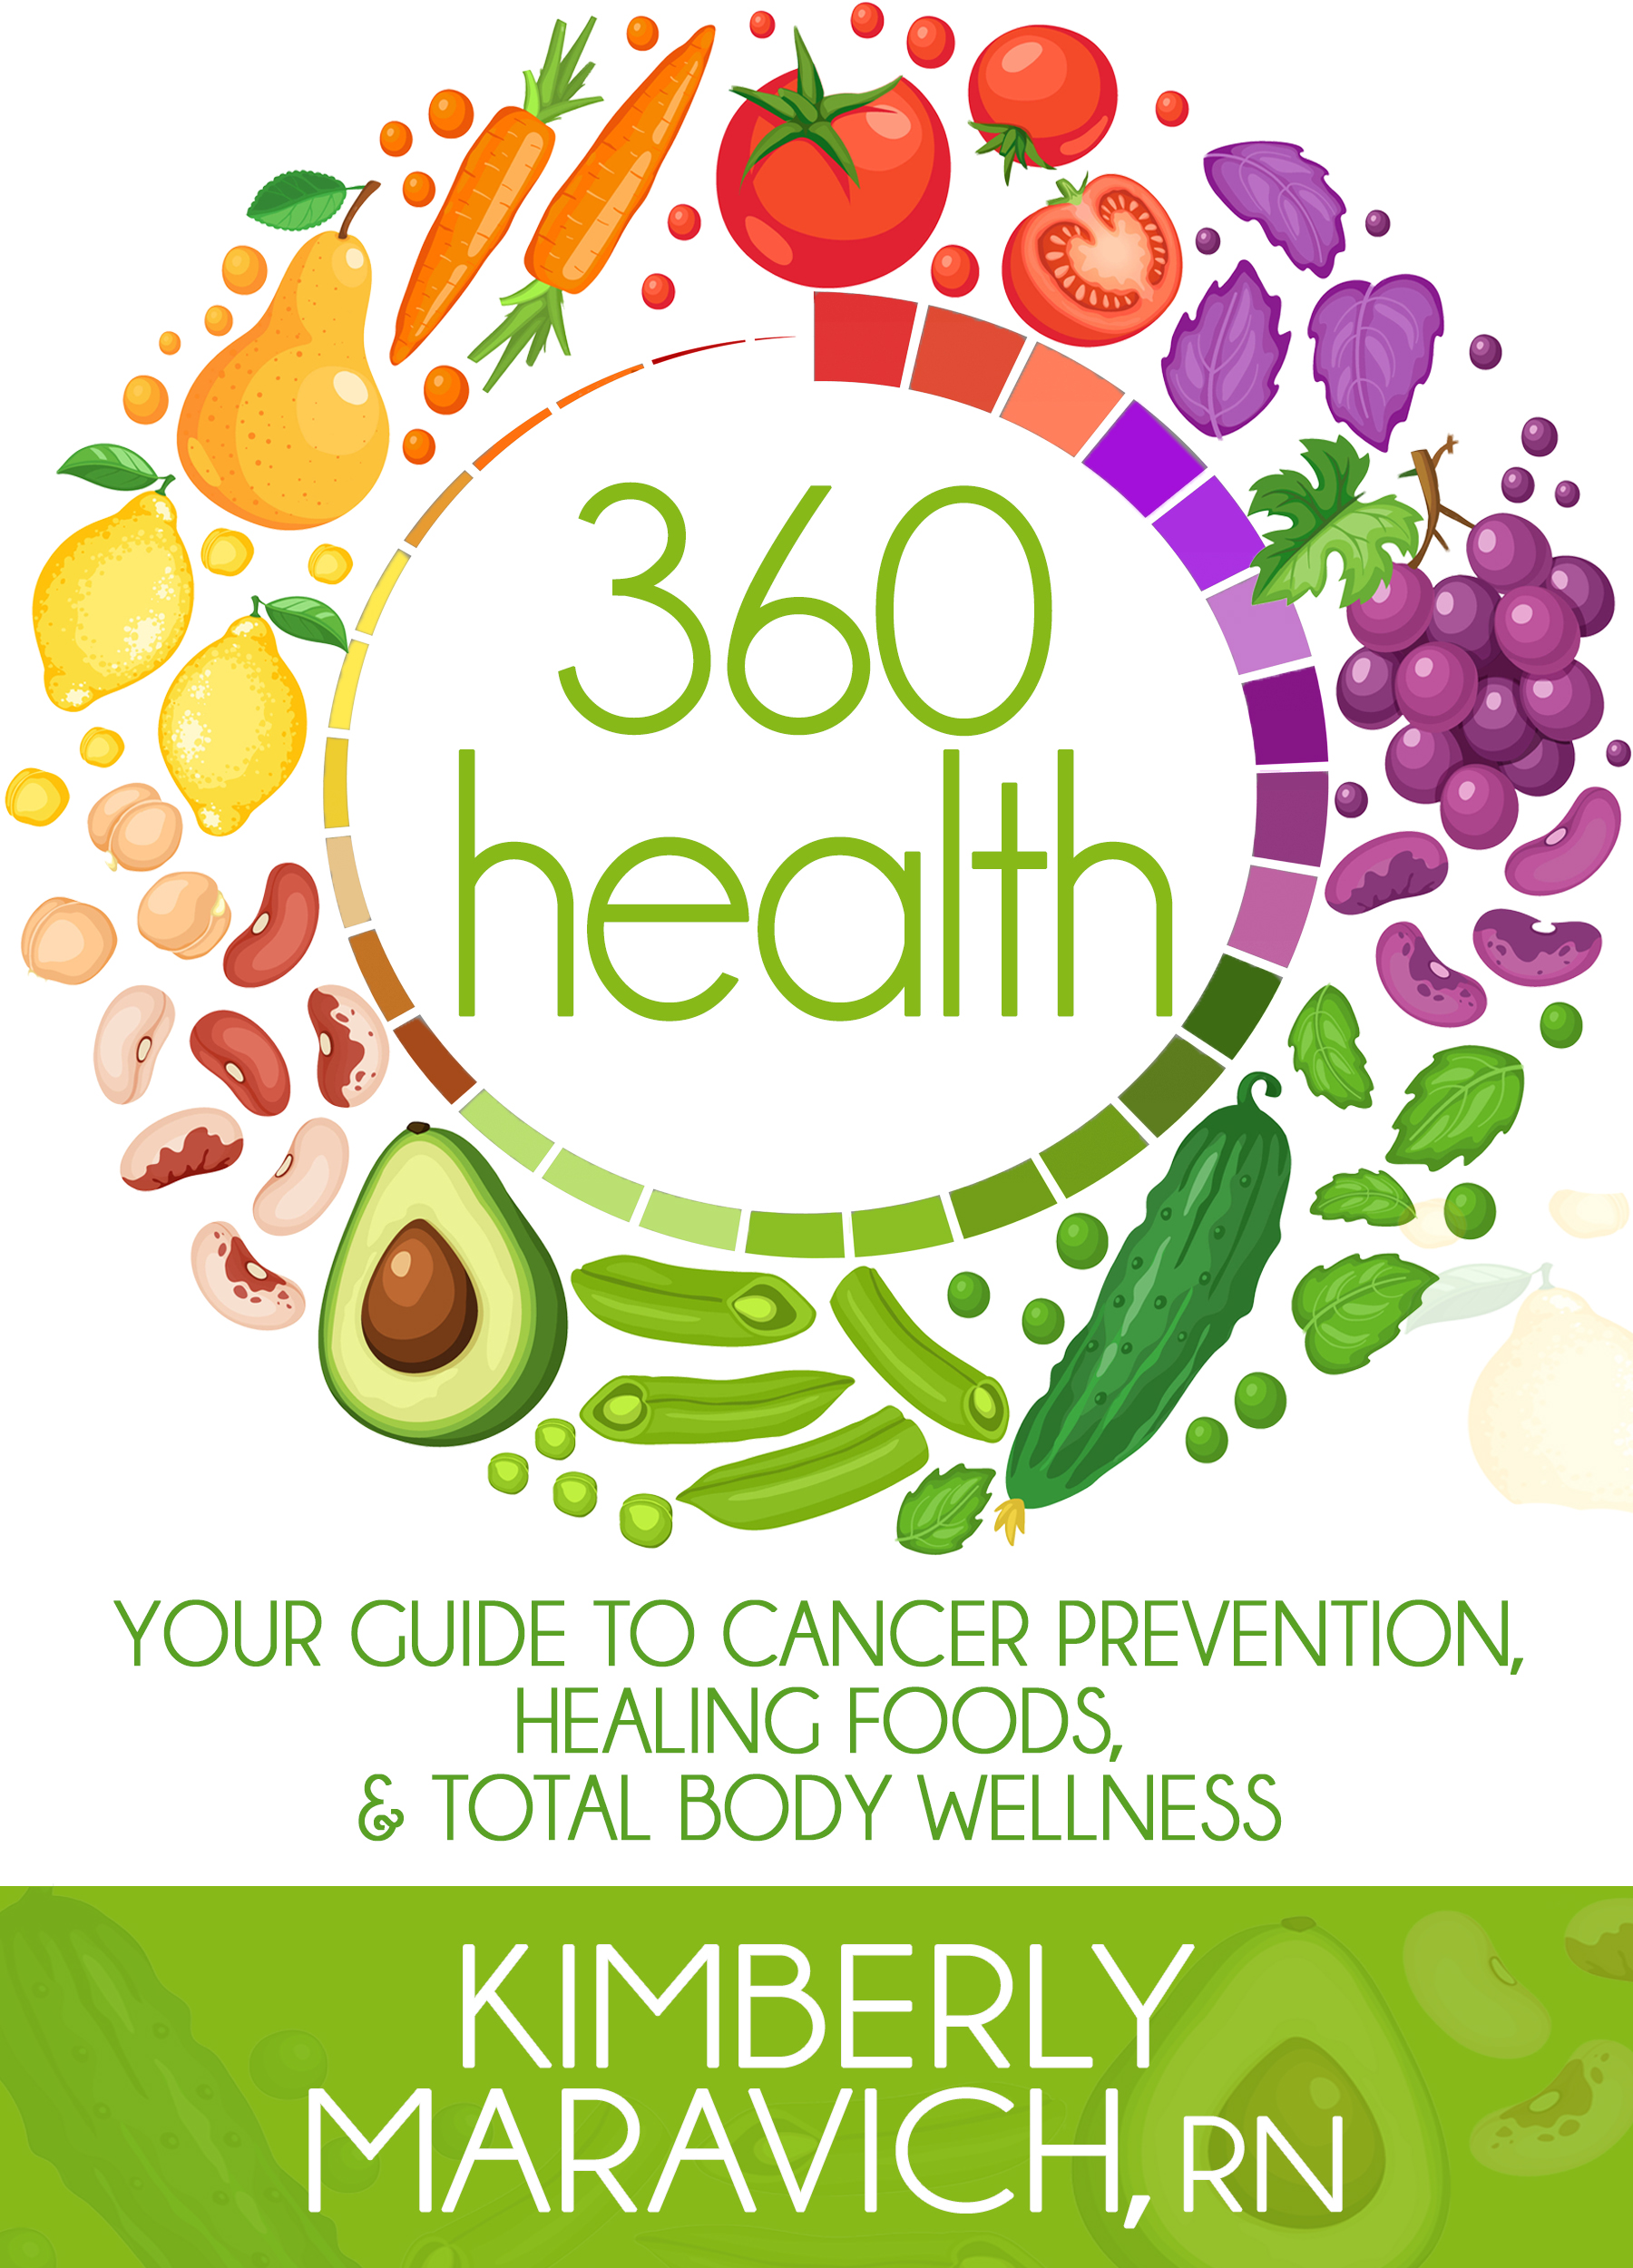 FREE: 360 Health: Your Guide to Cancer Prevention, Healing Foods, & Total Body Wellness by Kimberly Maravich